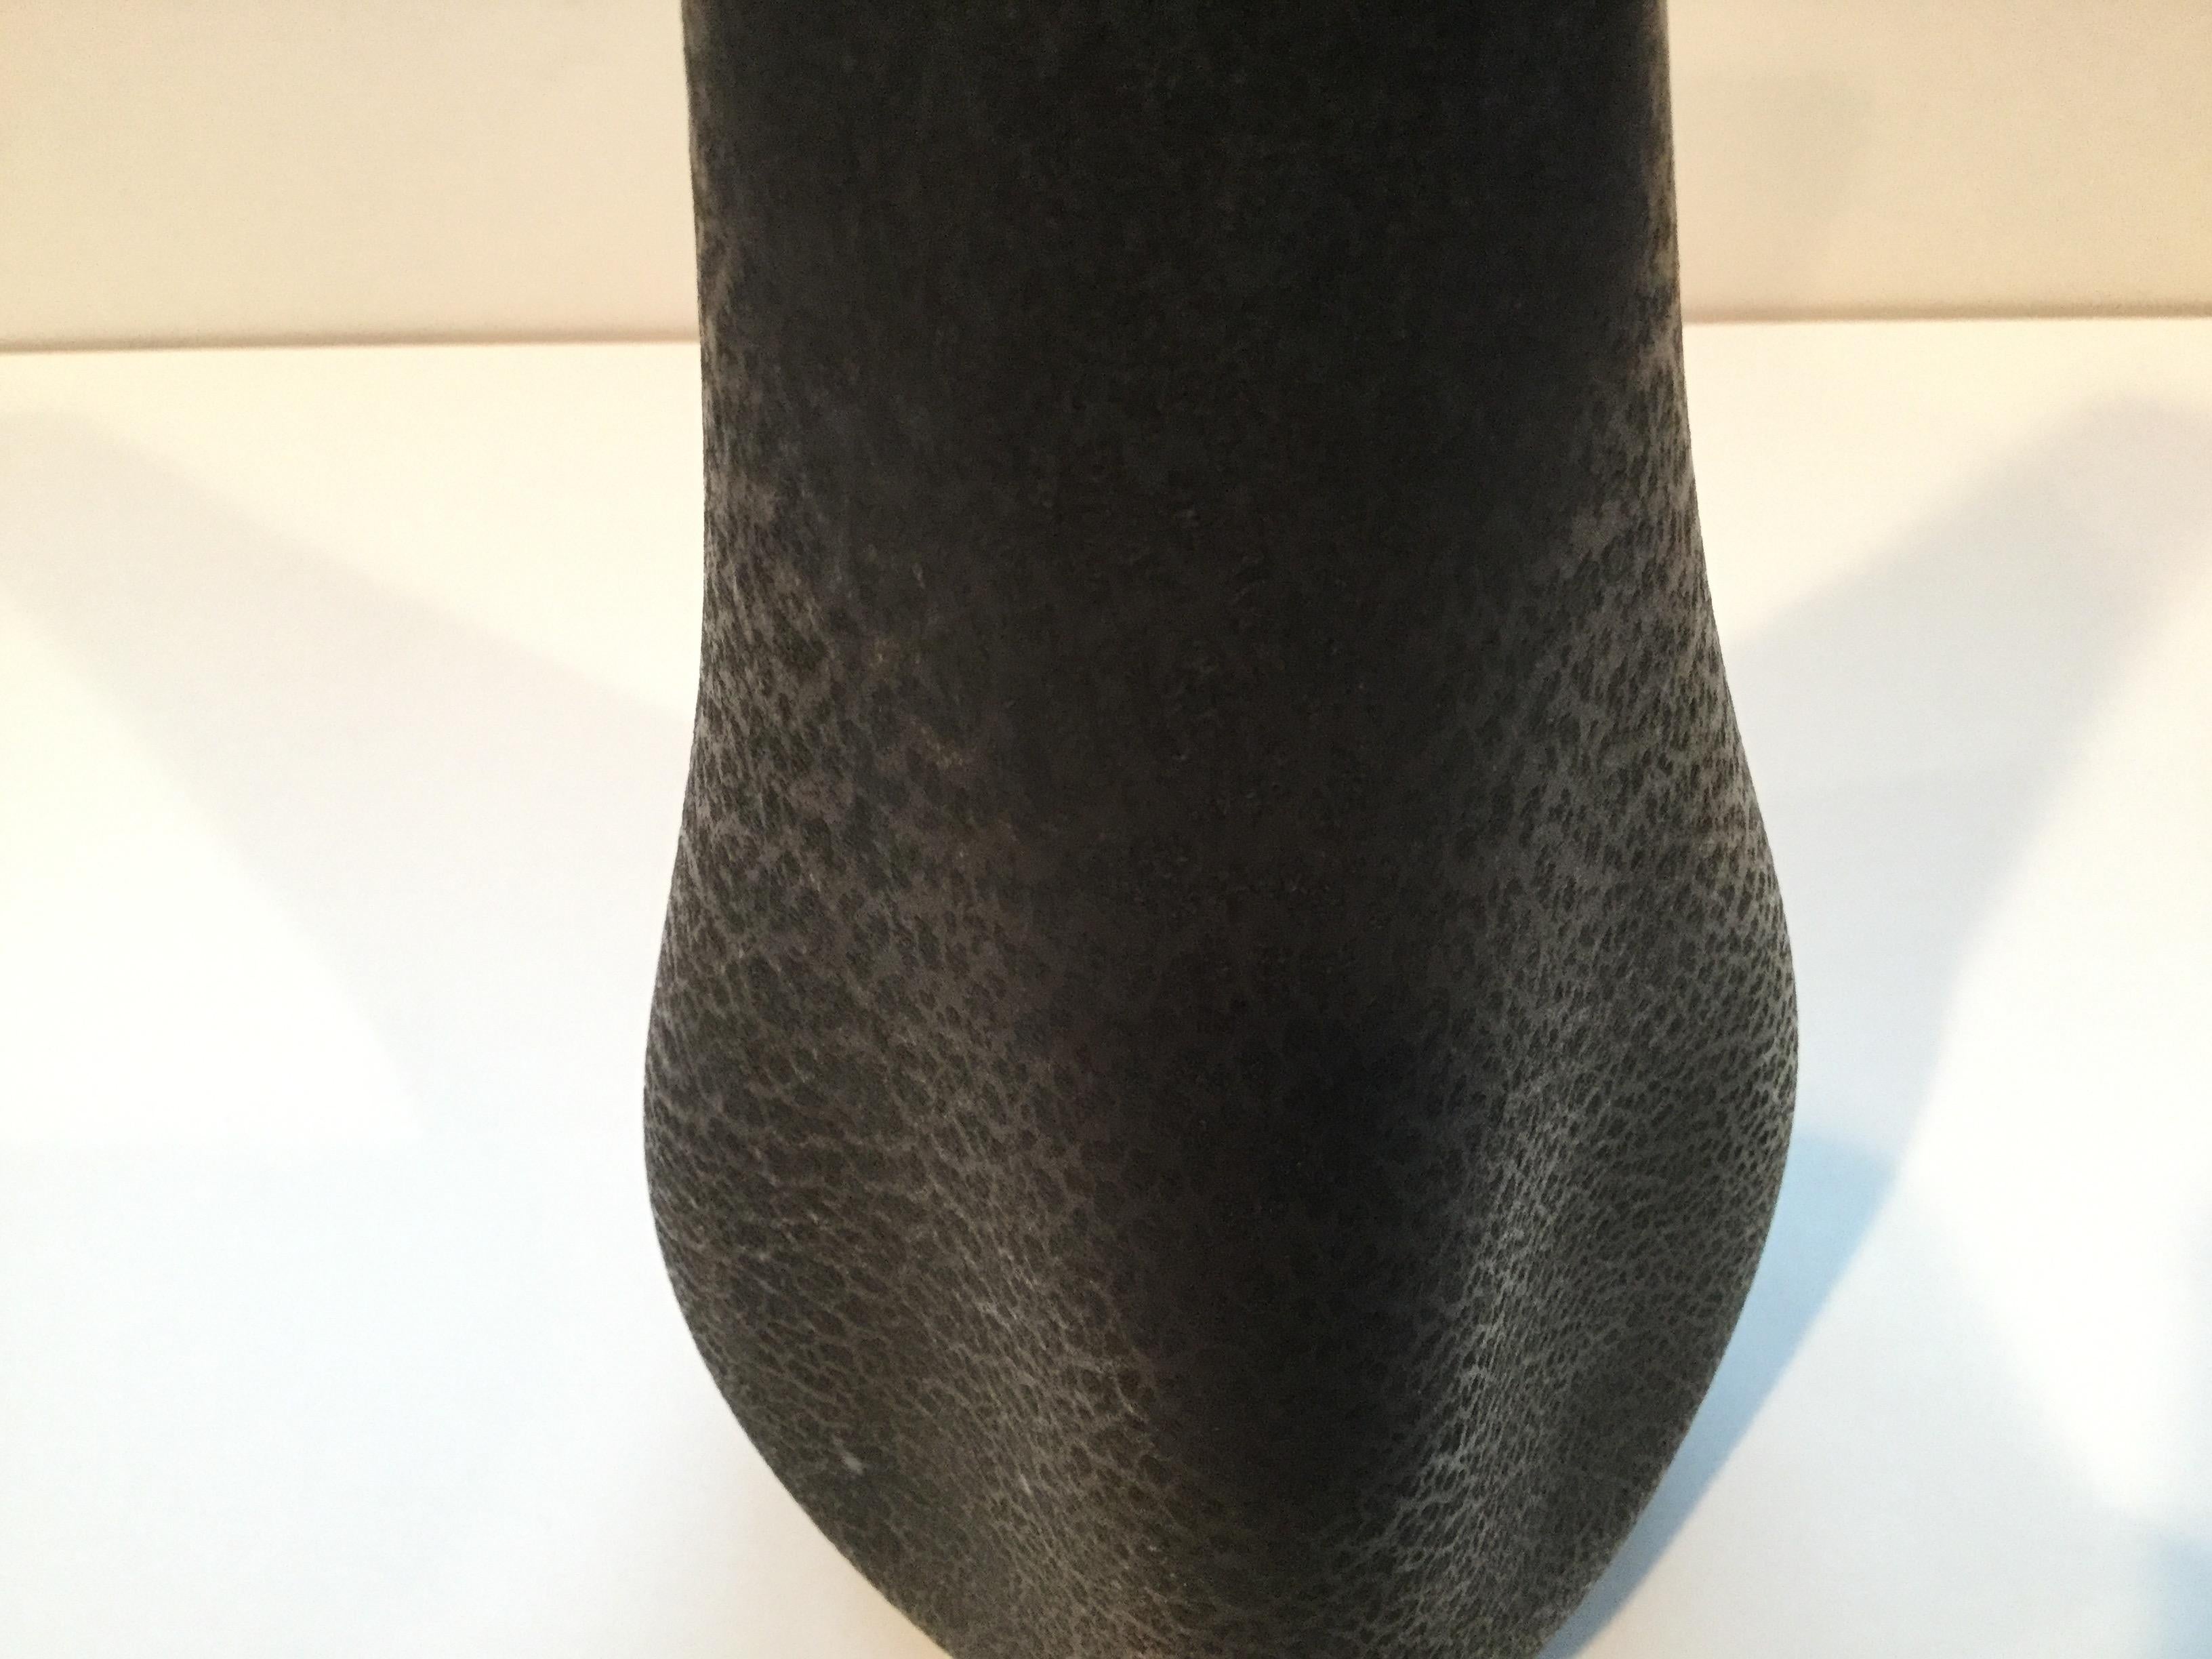 Rare Barbarico vase by Ercole Barovier for Barovier and Toso. Partial original model number label.